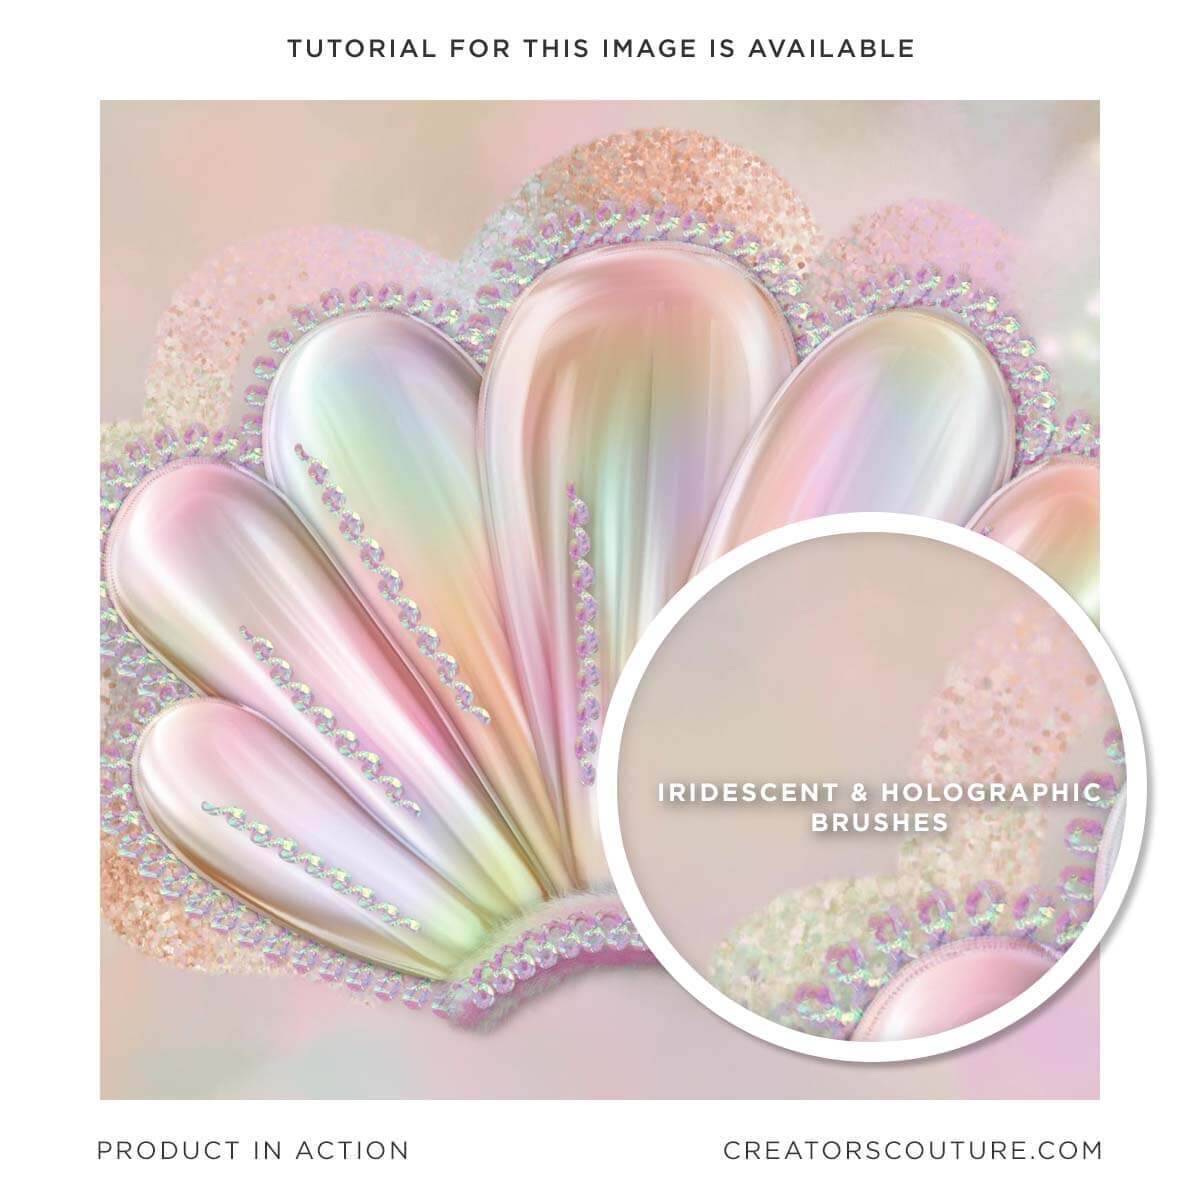 pearlescent shell digital art illustration accented with iridescent and holographic multicolor photoshop brush strokes